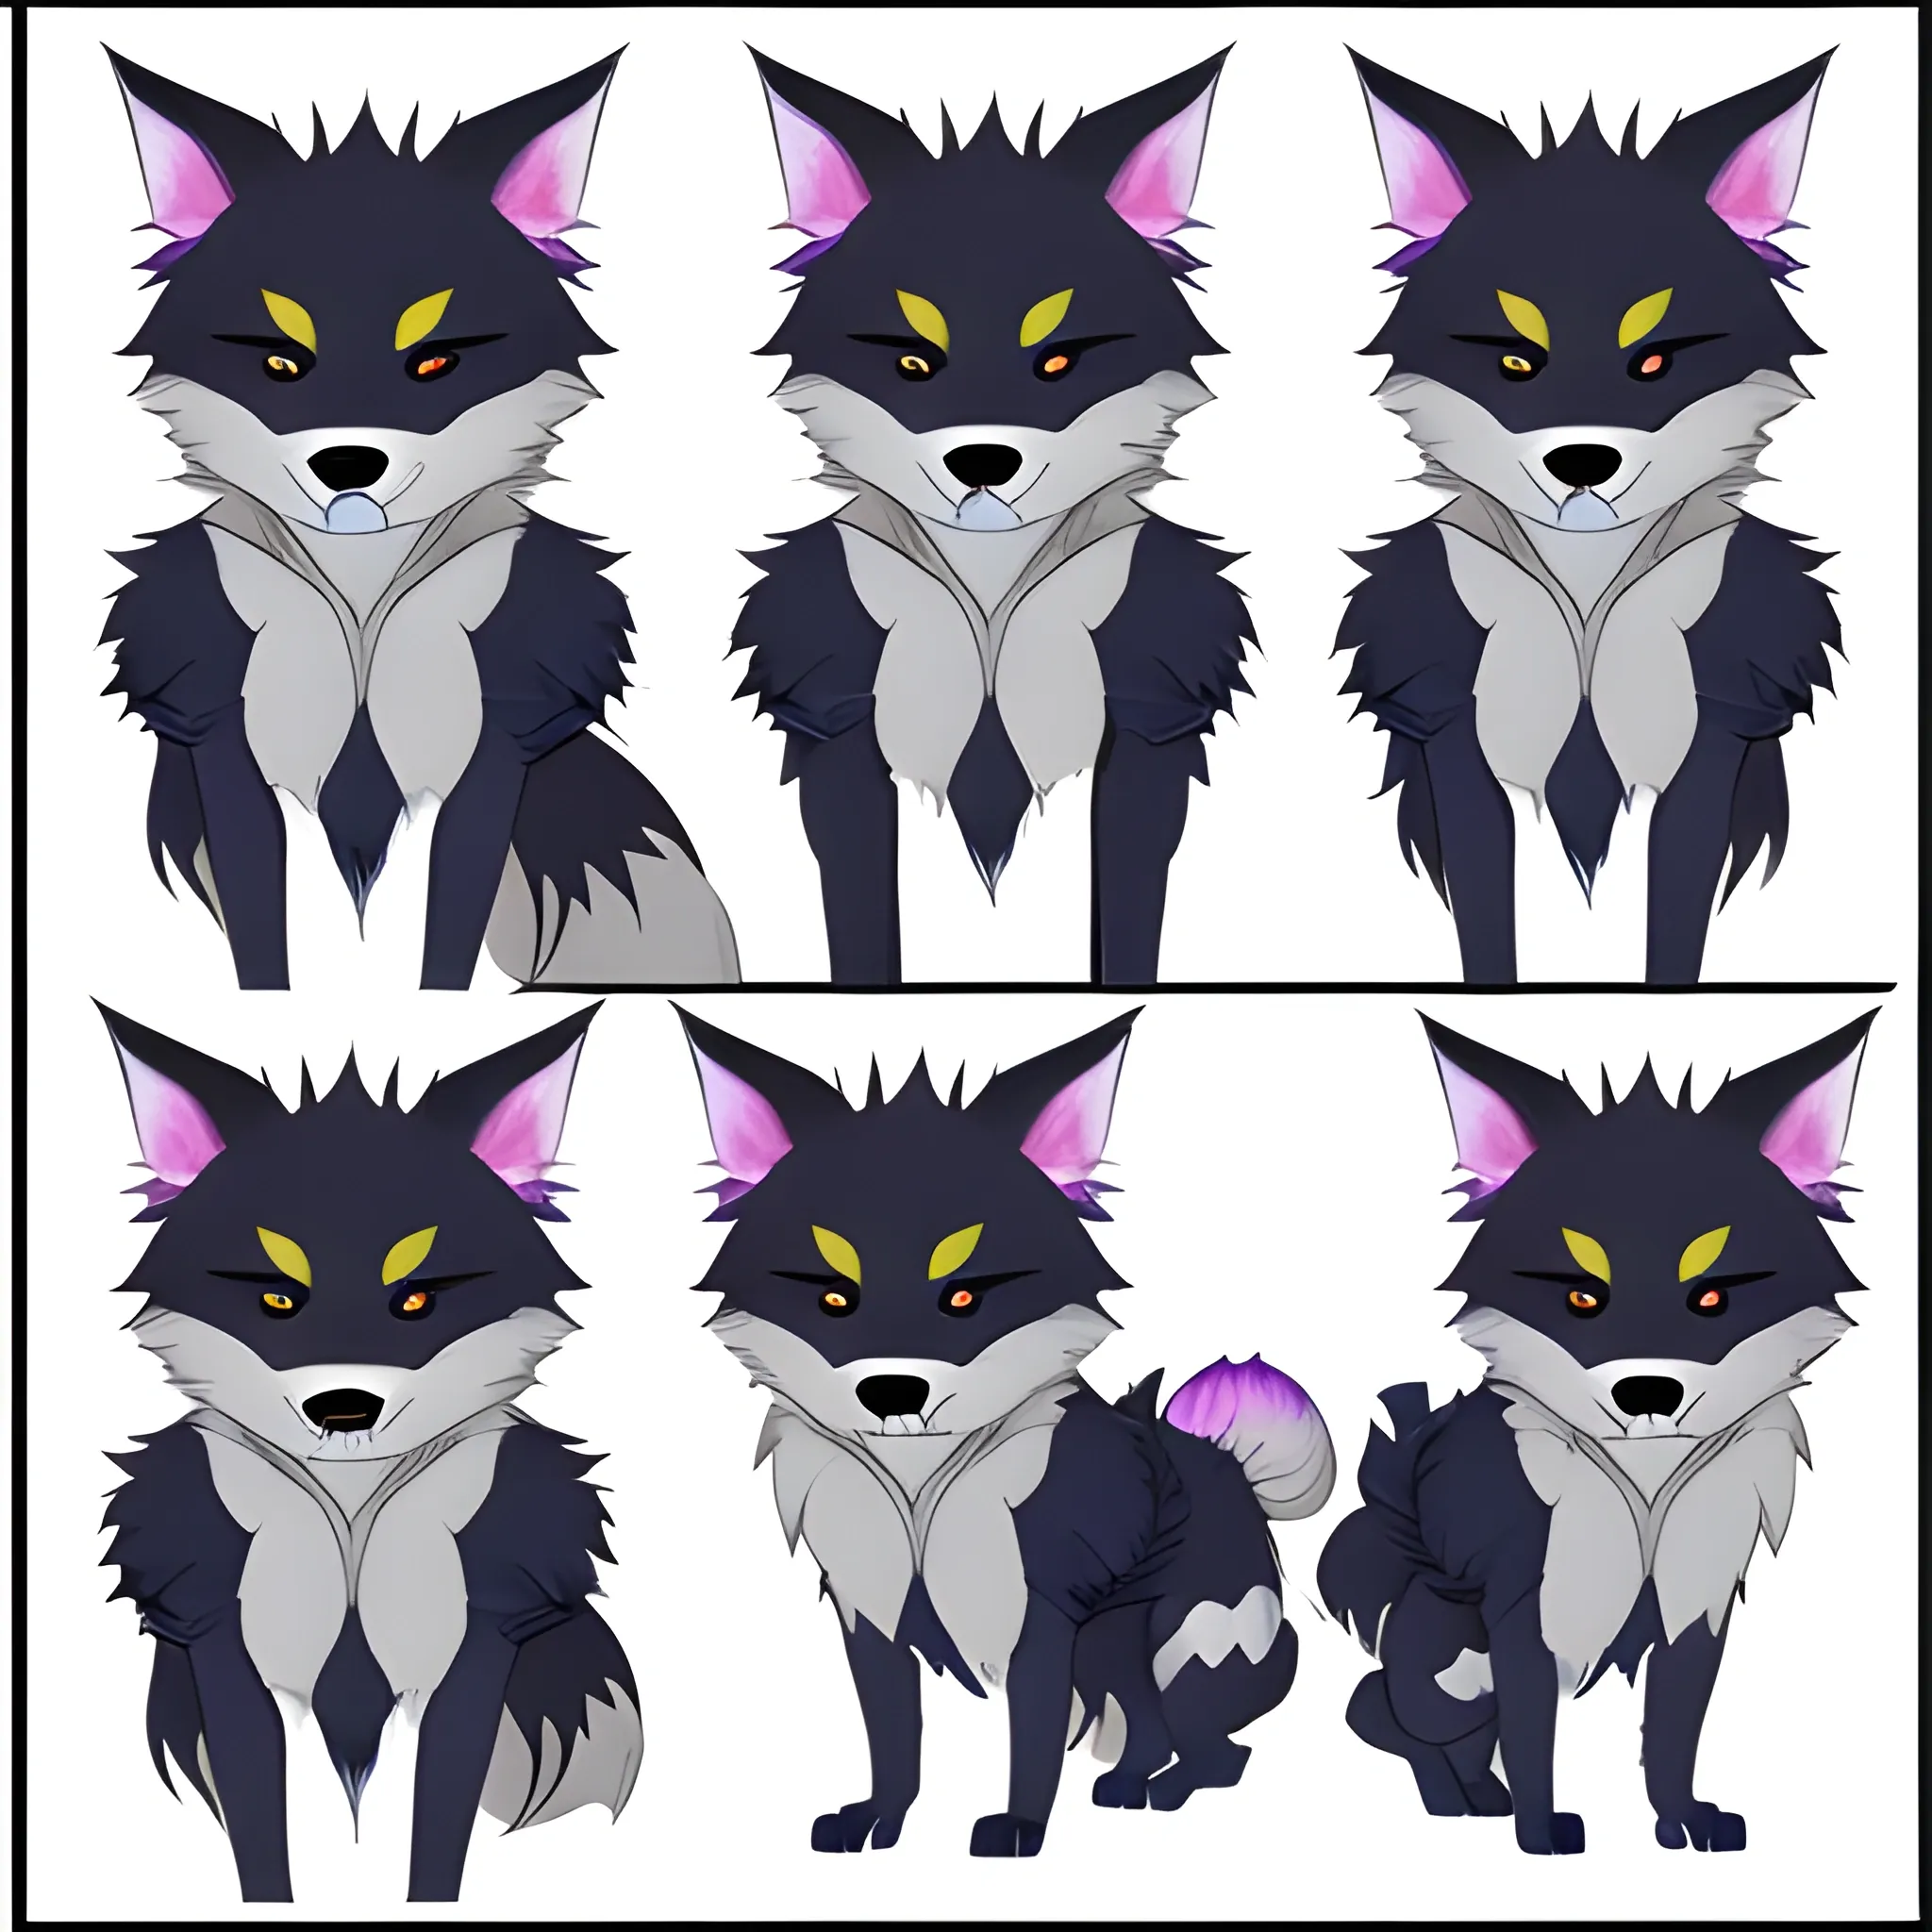 create a furry reference sheet , discription is "His names is xui and he’s a black ten tailed kitsune with blue markings around his face